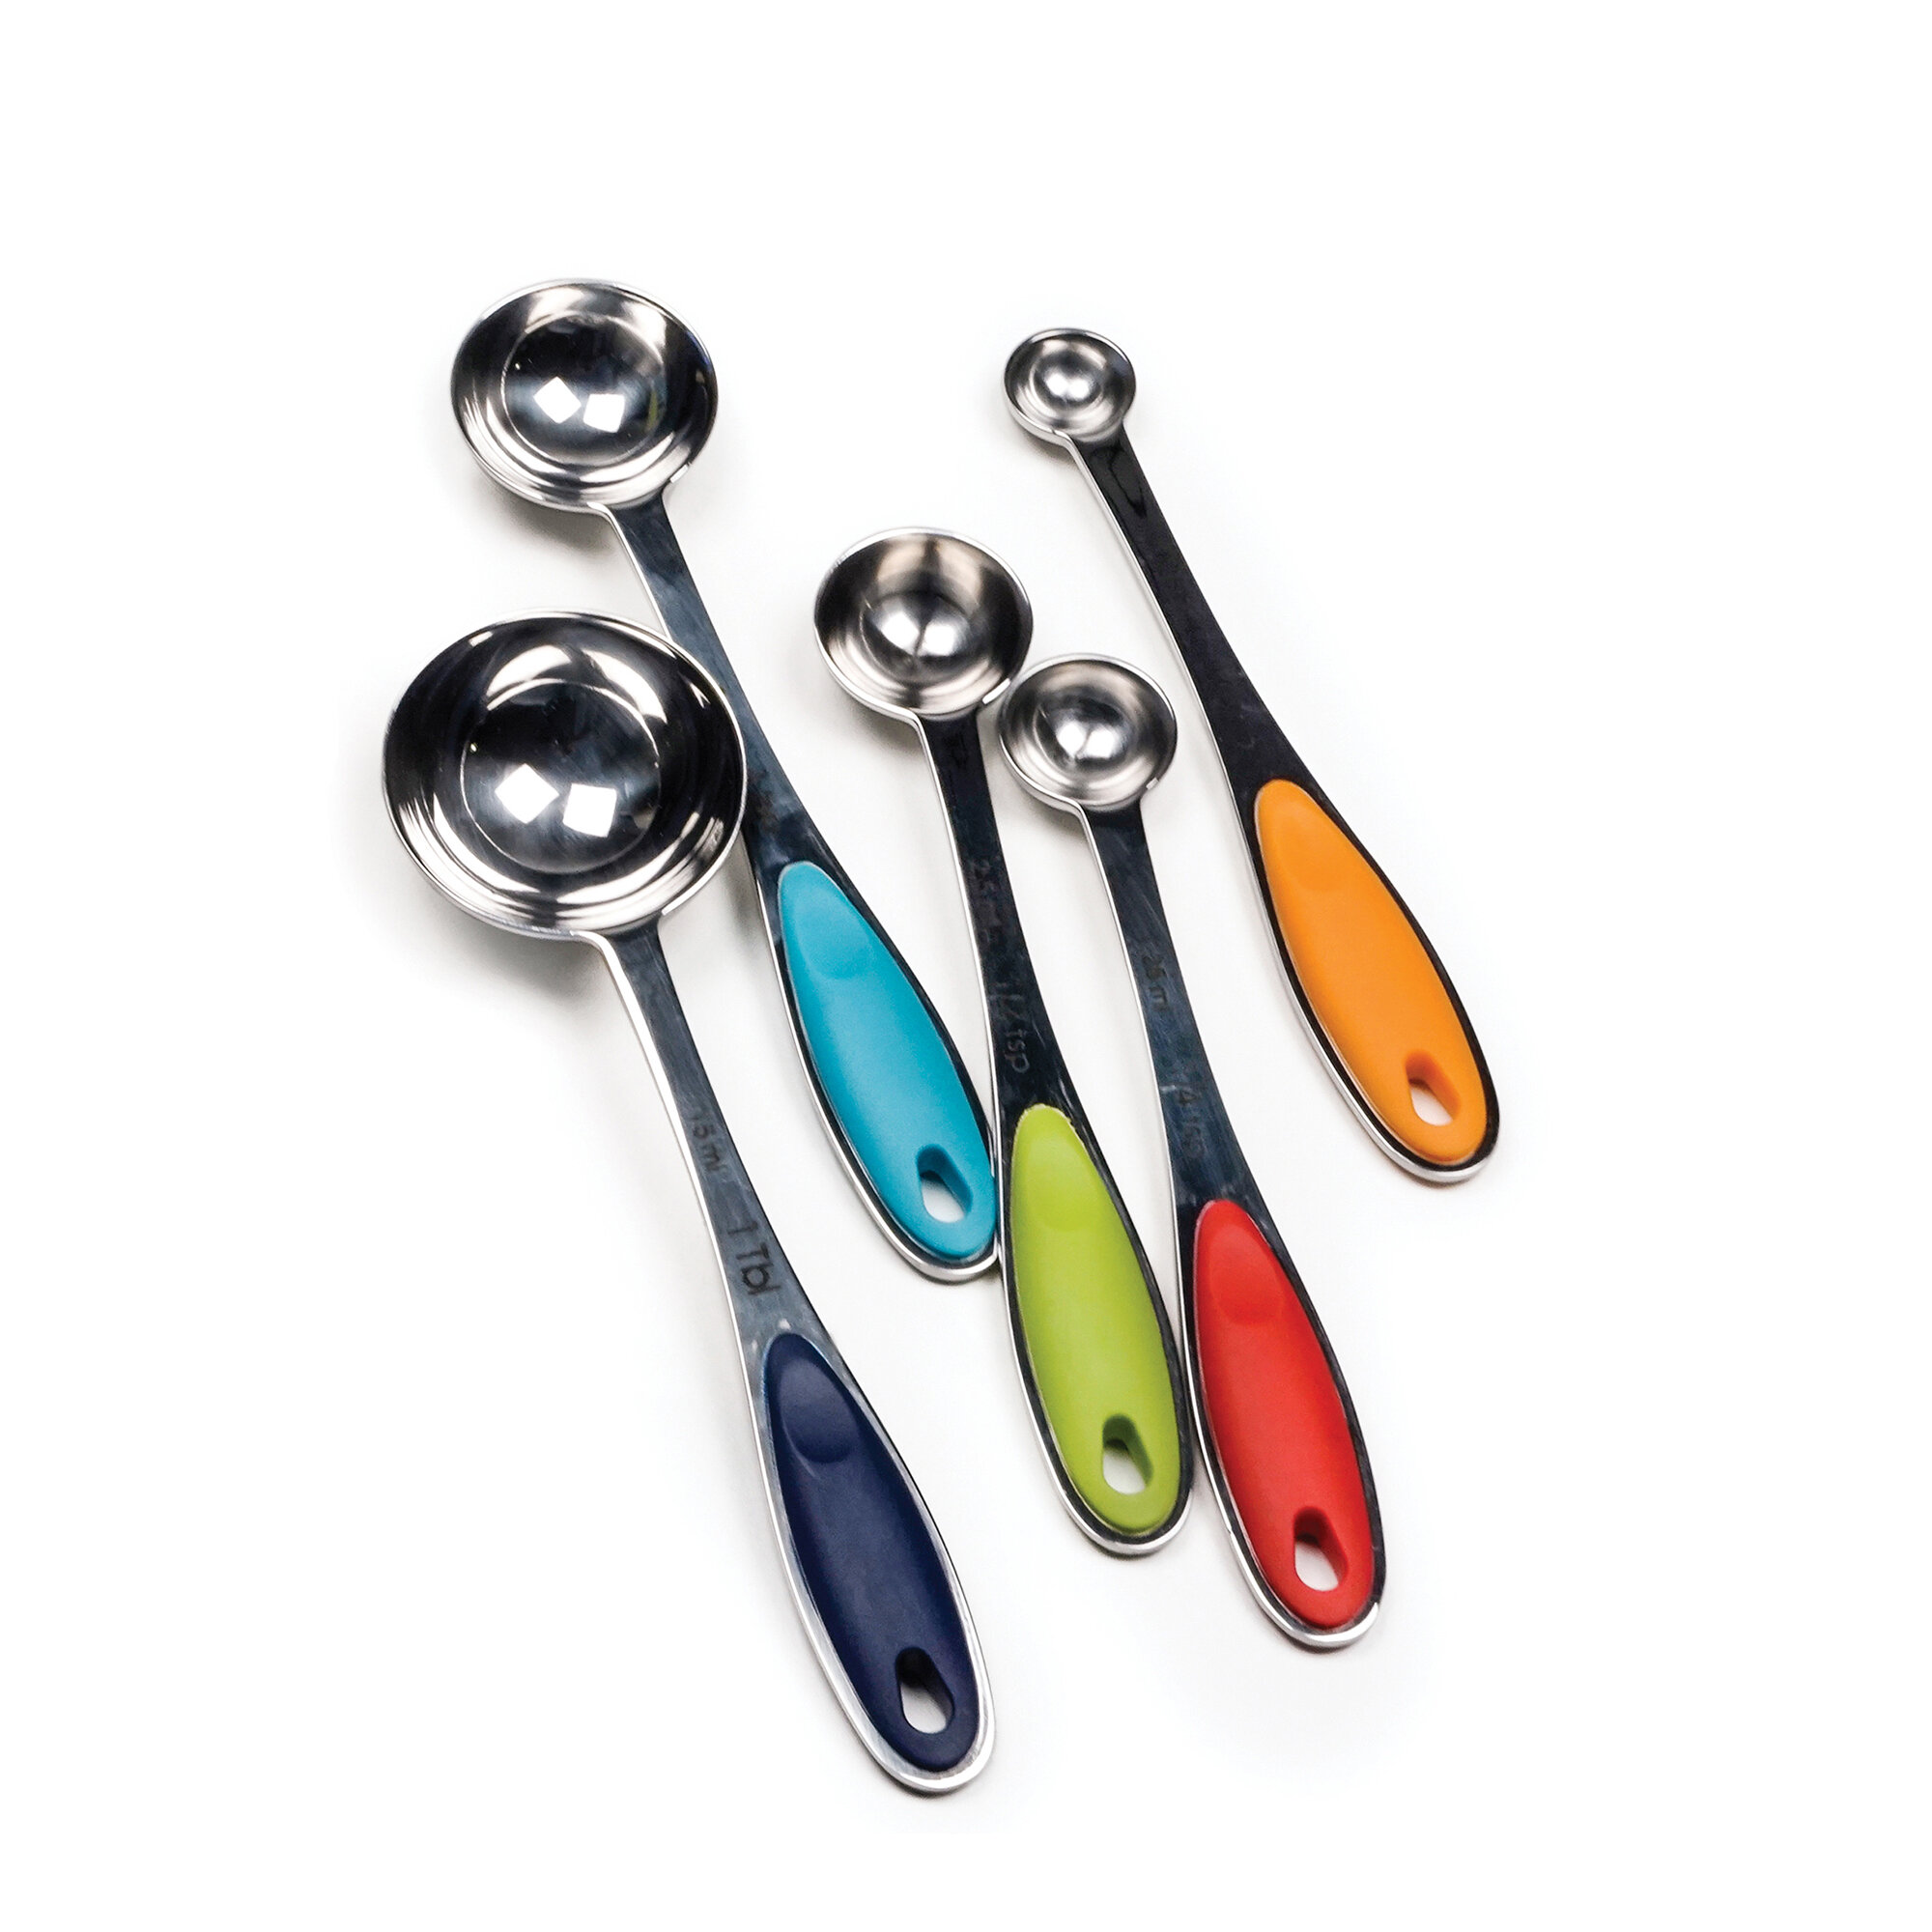 Amco Stainless Measuring Spoons - Set of 4. A-6